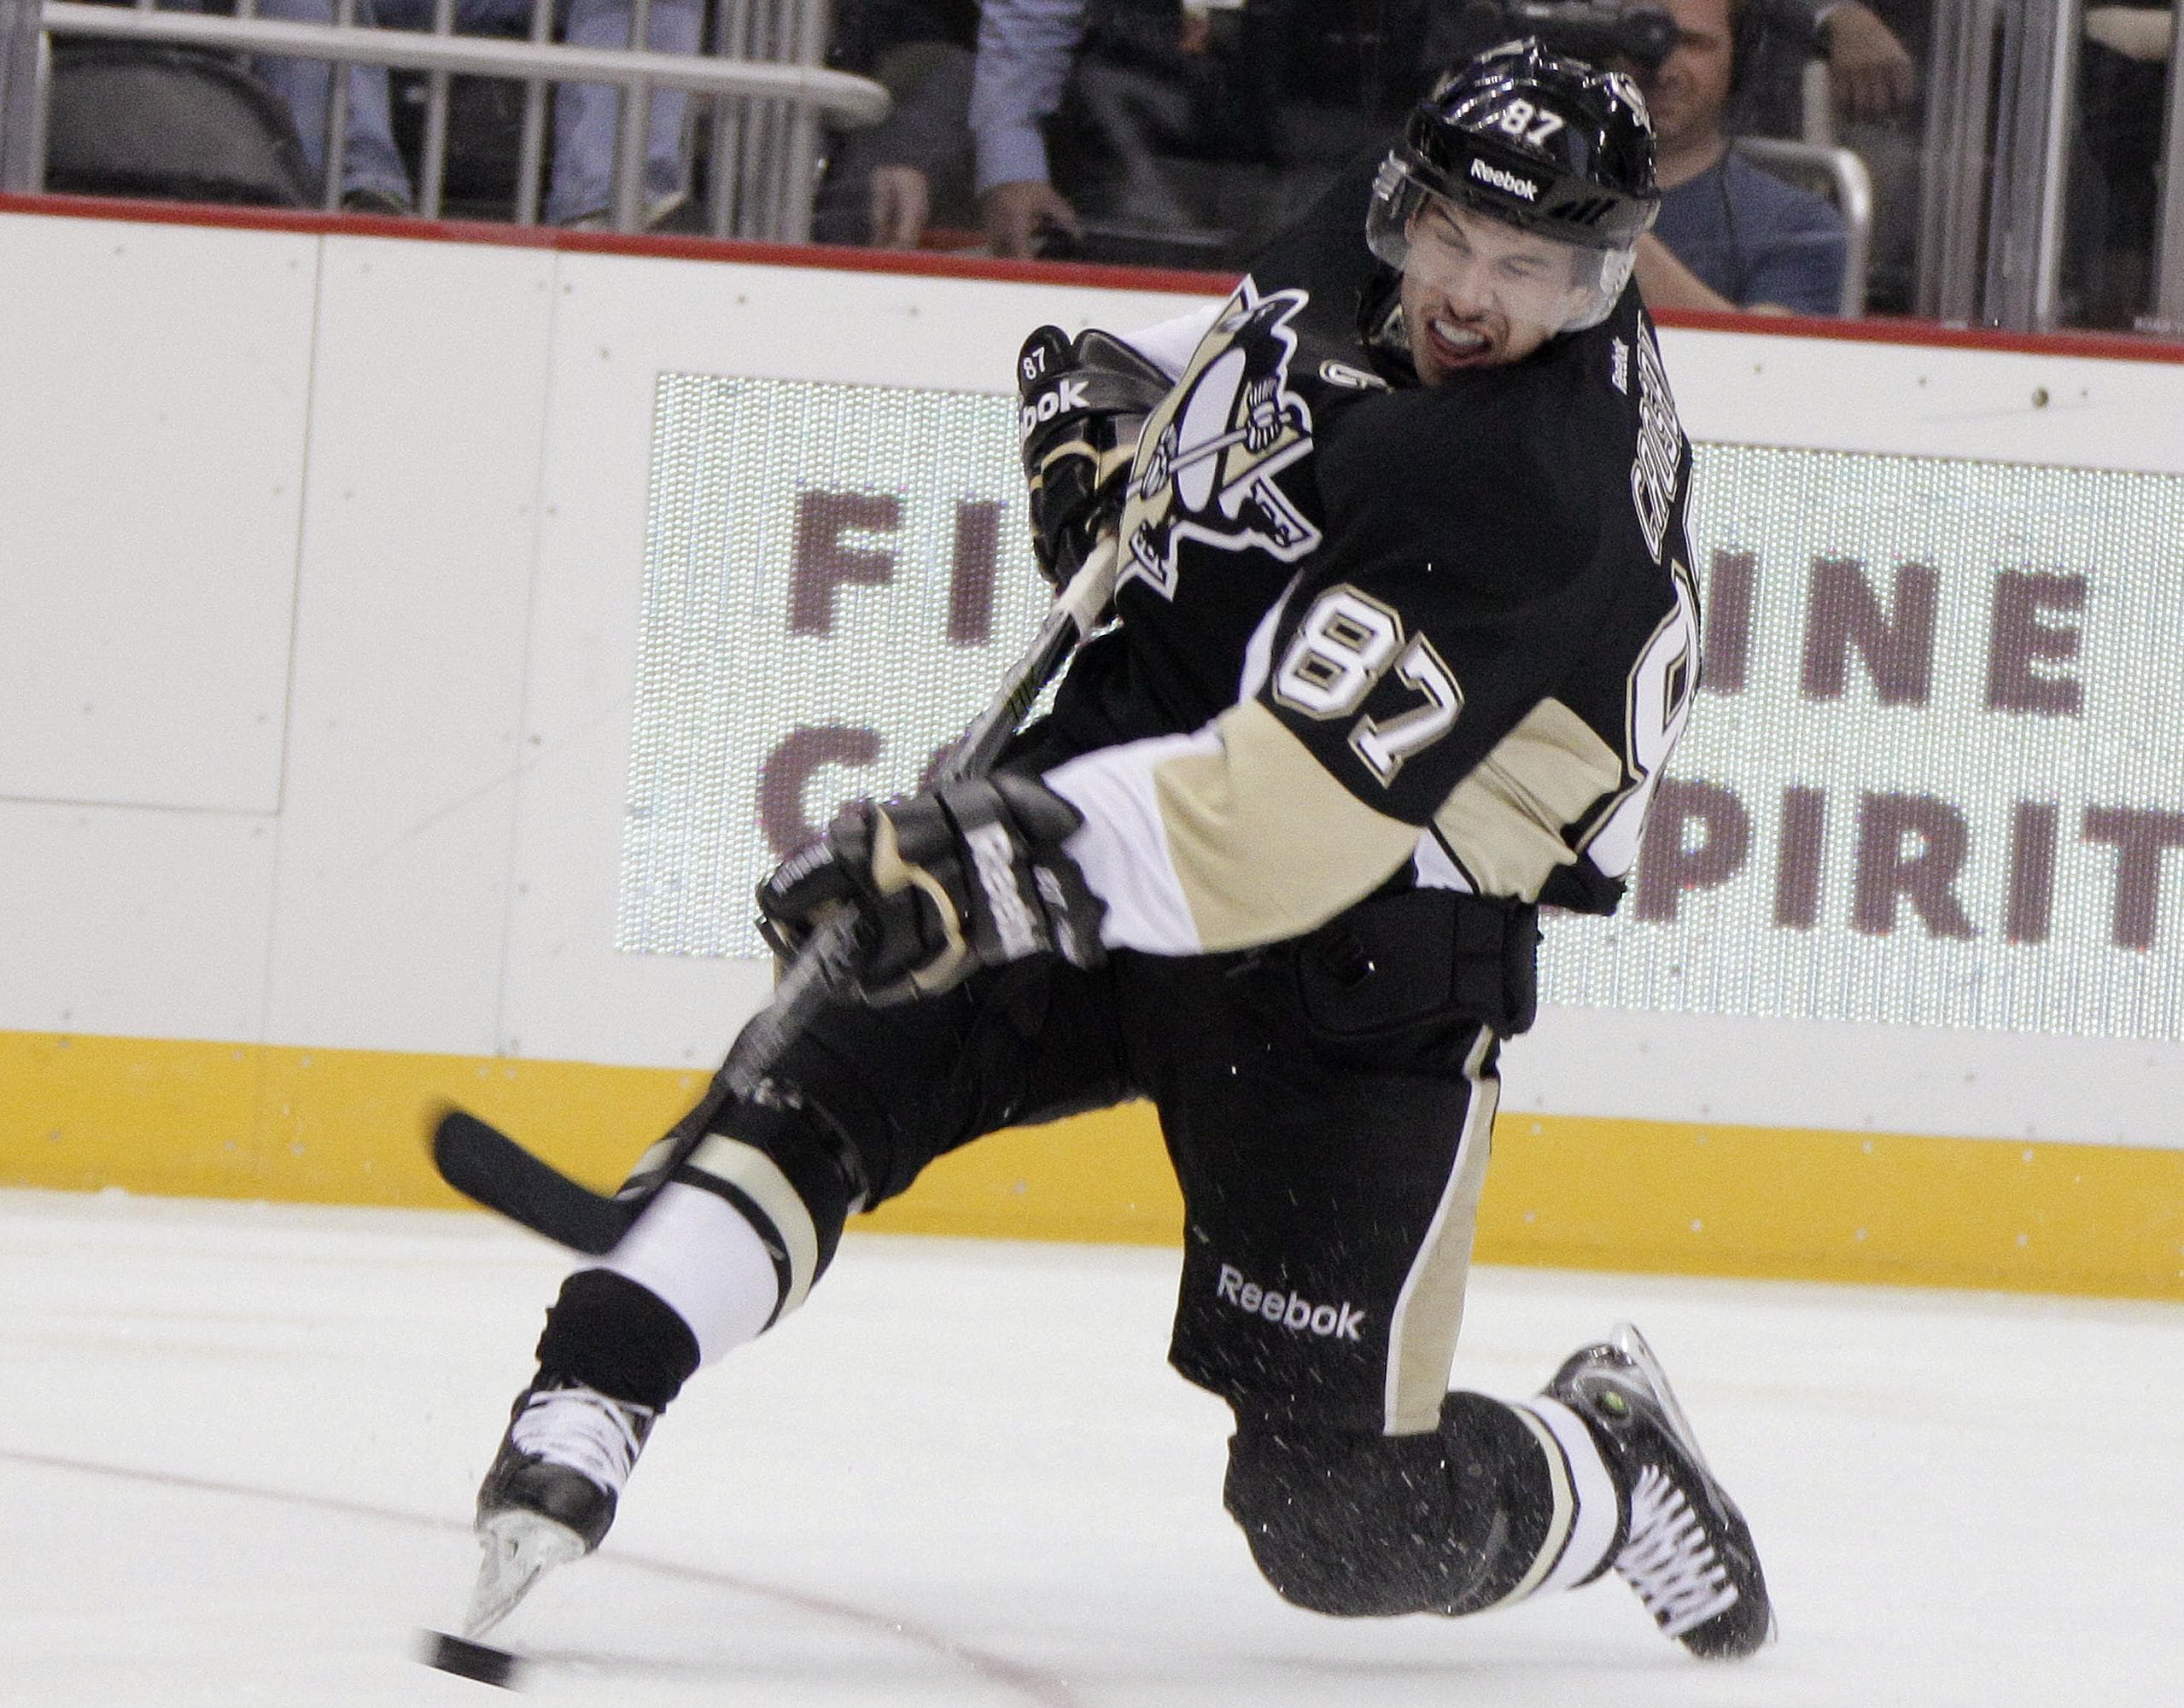 NHL's Sidney Crosby Returns To Form Only A Game